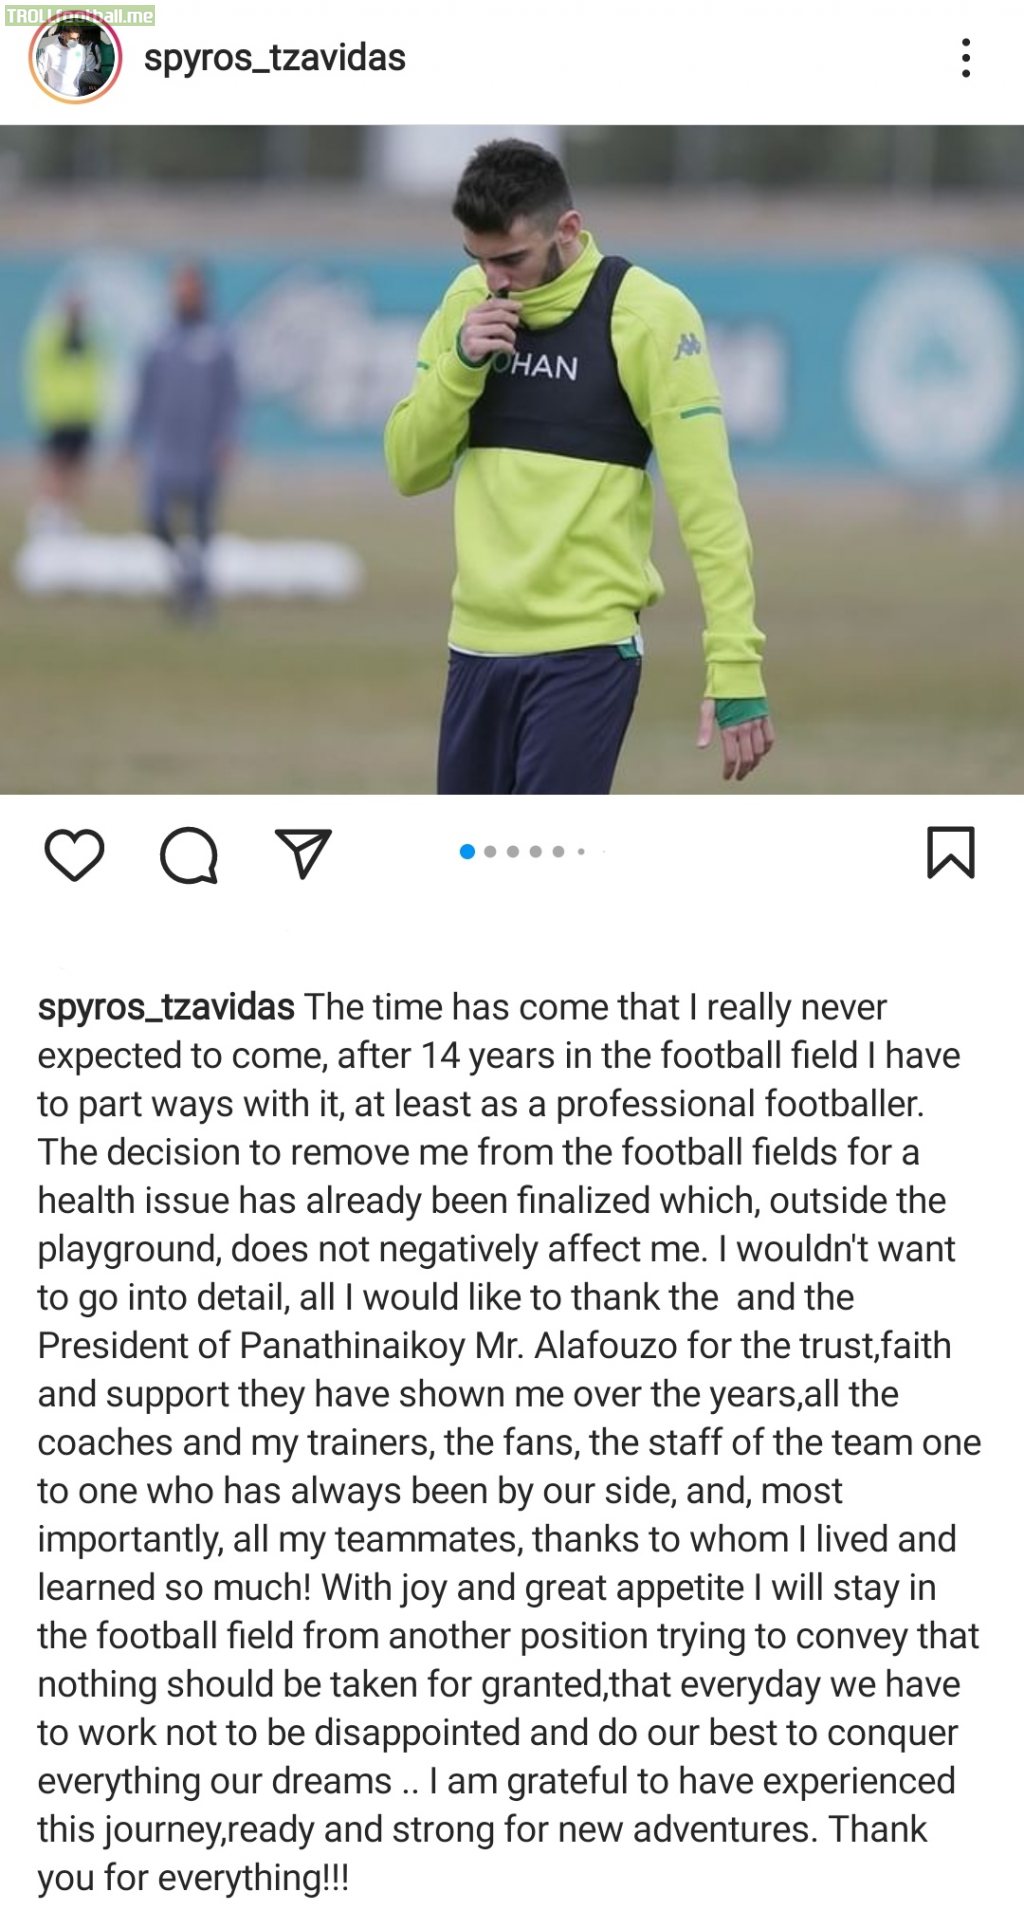 Panathinaikos player Spyros Tzavidas has confirmed on Instagram that he is forced to retire from football at the age of 20,due to a health issue.He will continue his career as a scouter.